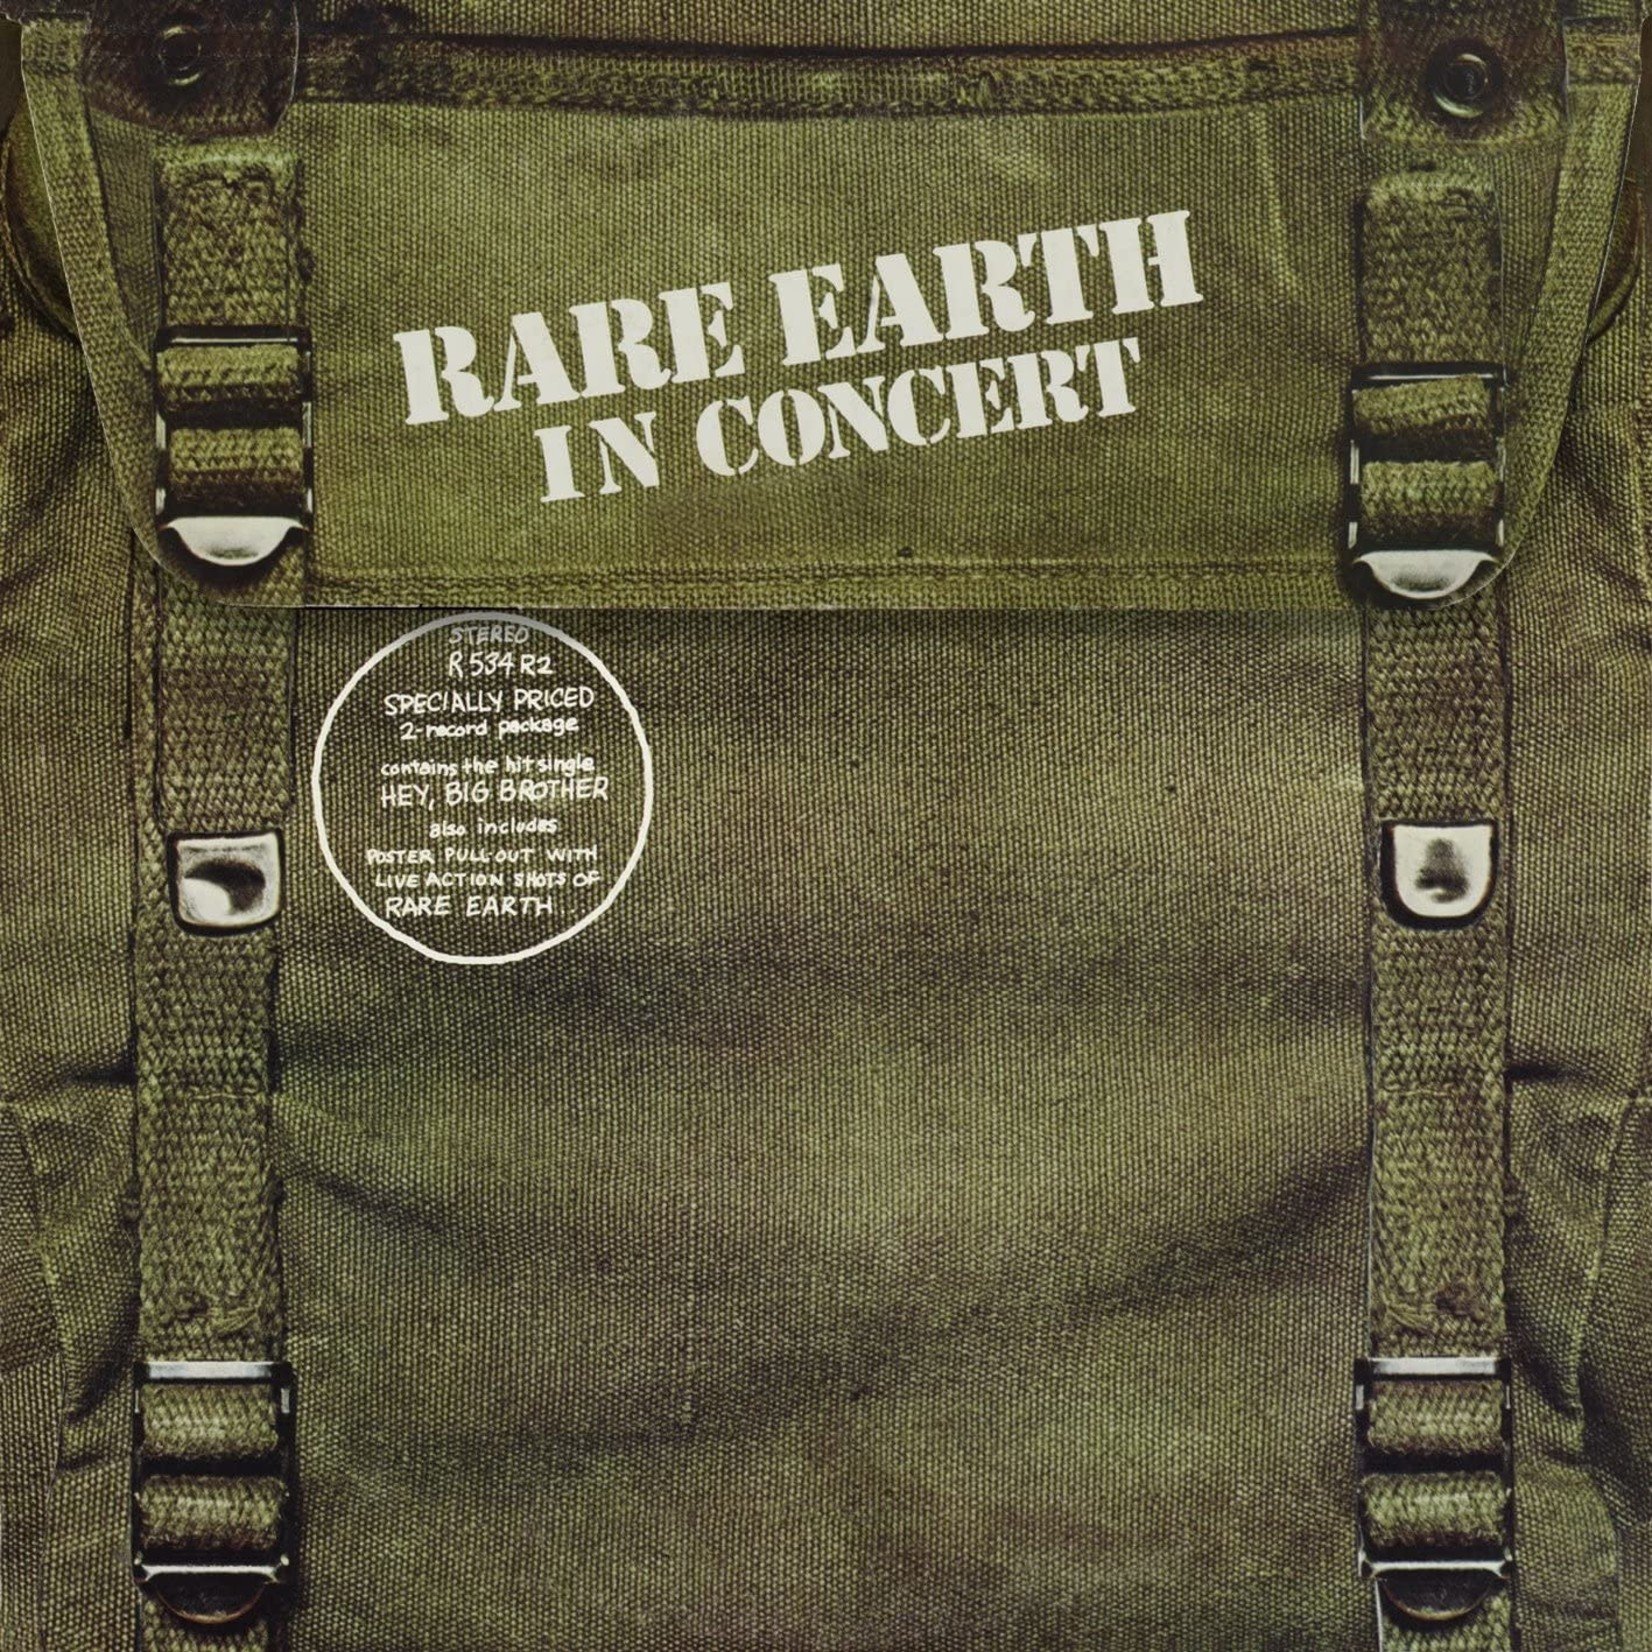 [Vintage] Rare Earth - In Concert